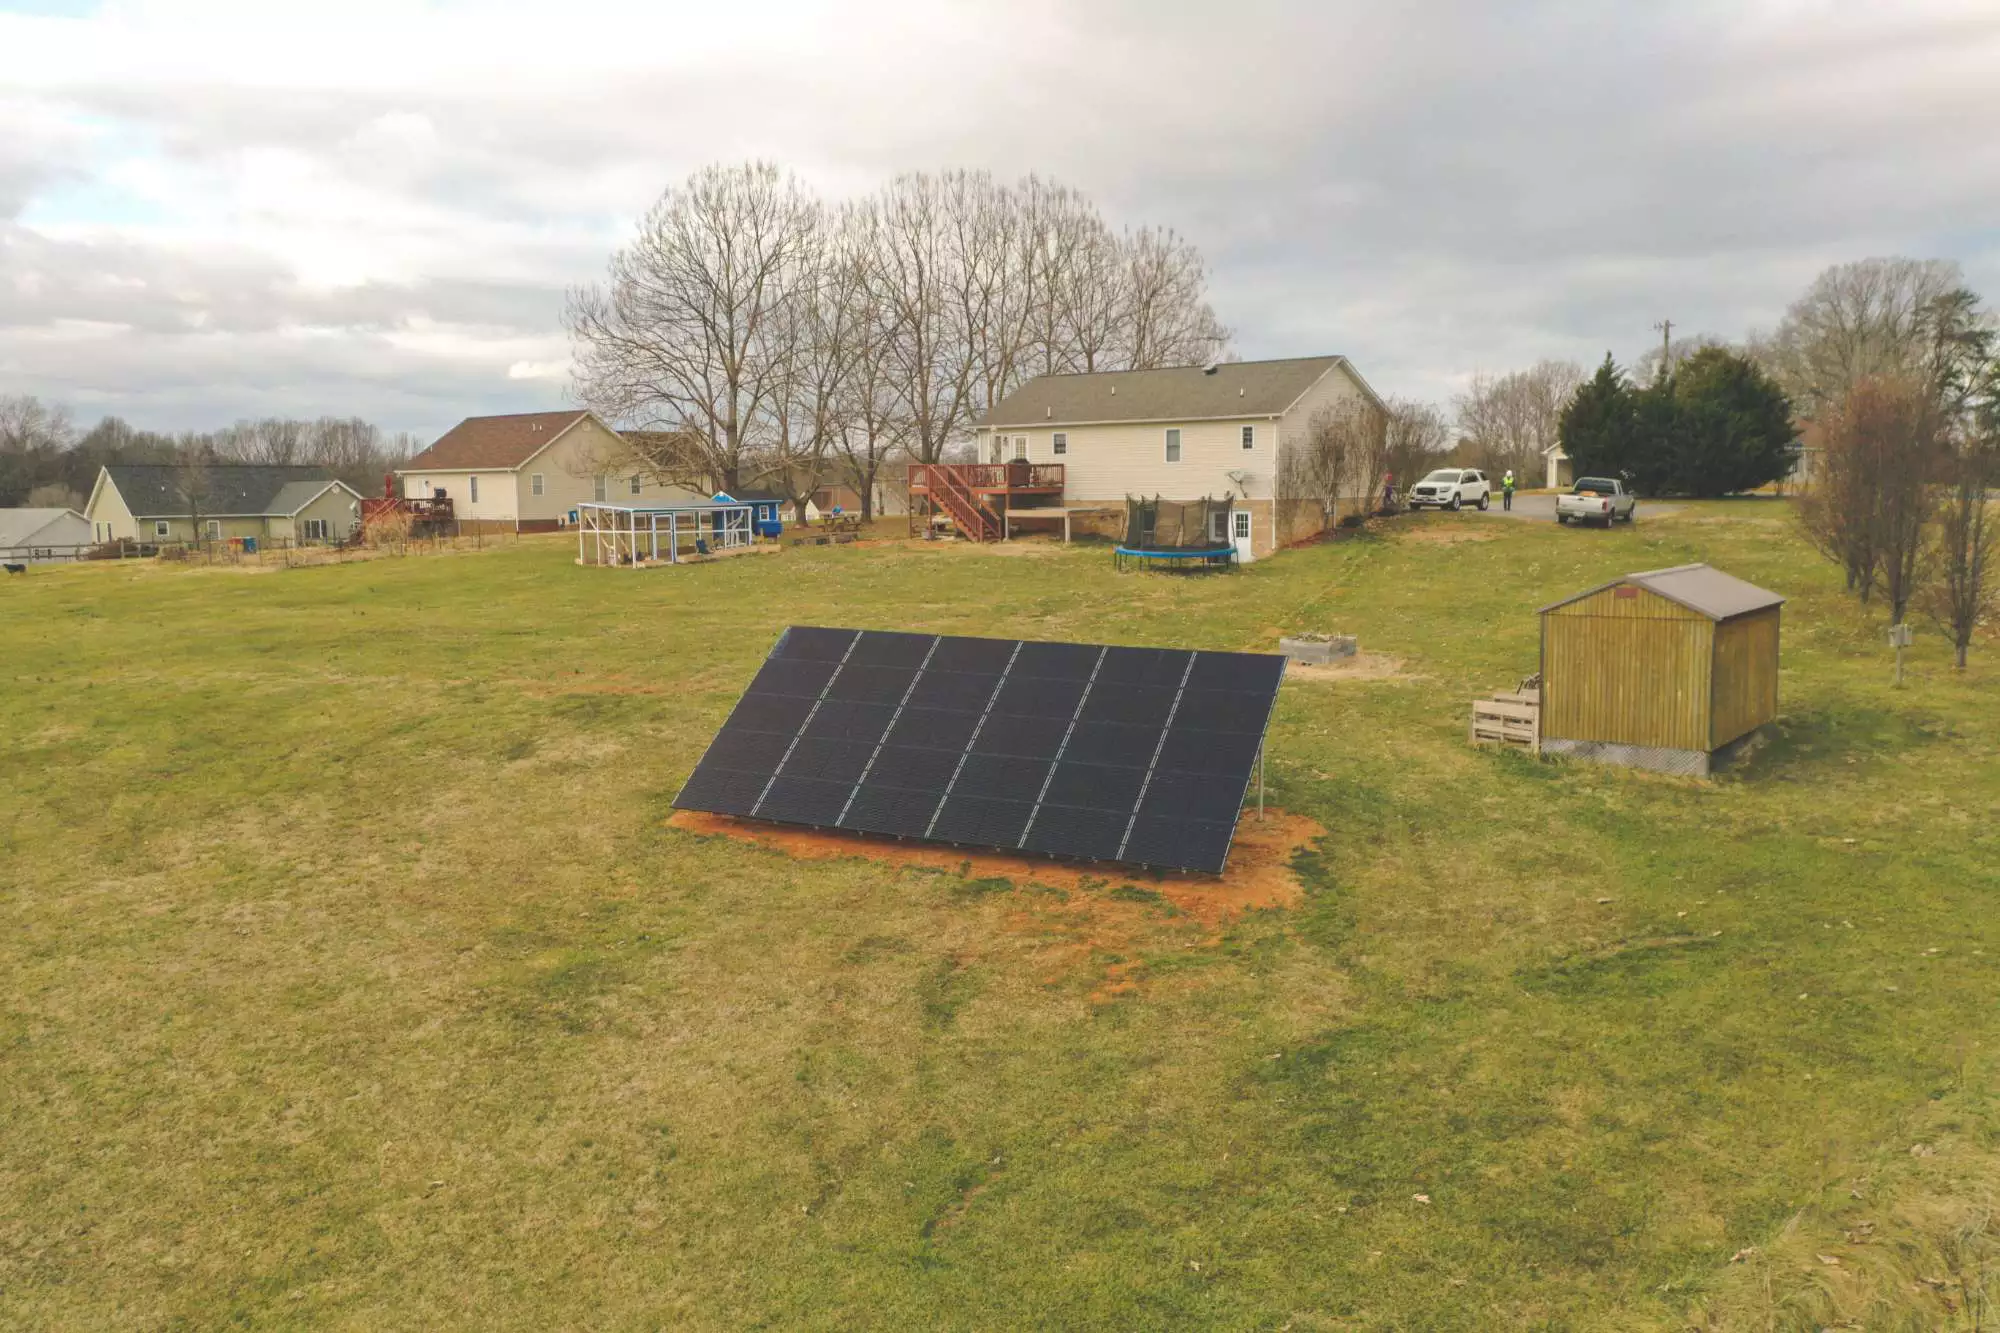 Ground mounted solar panels with home in the background